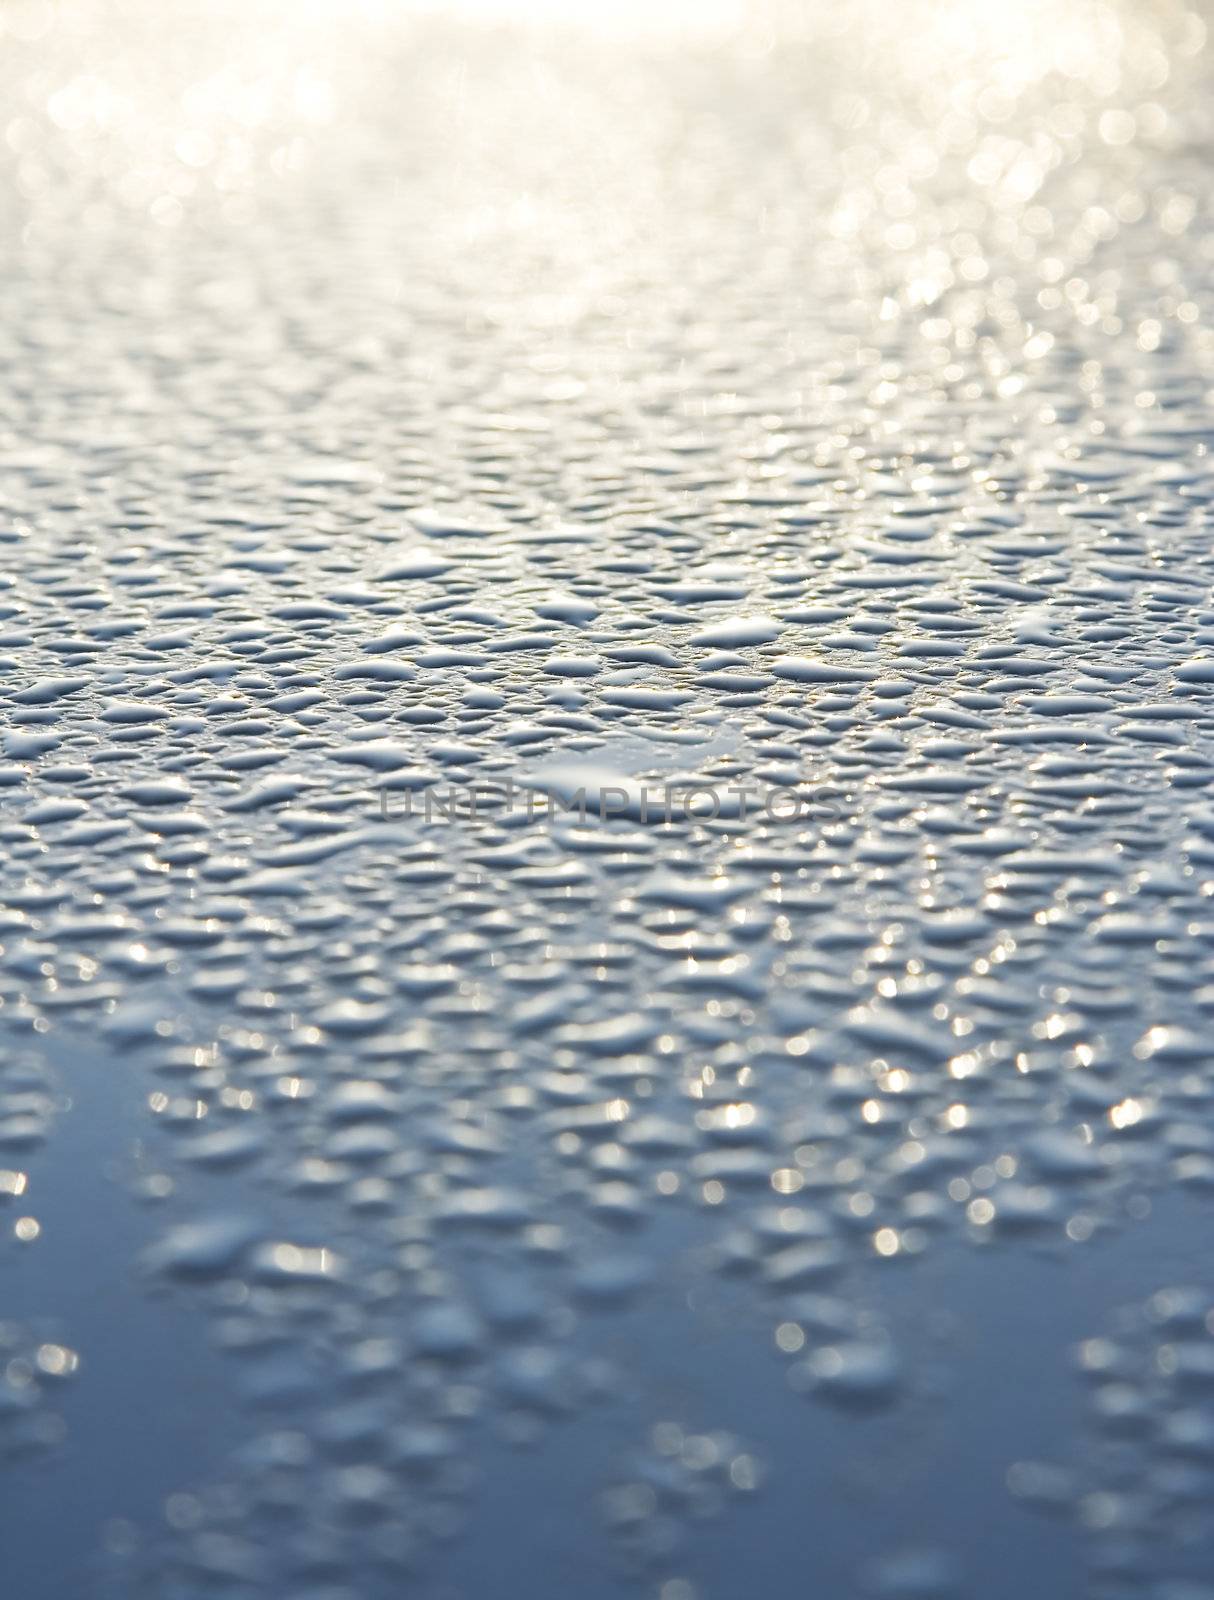 Water droplets on a metallic car paint.